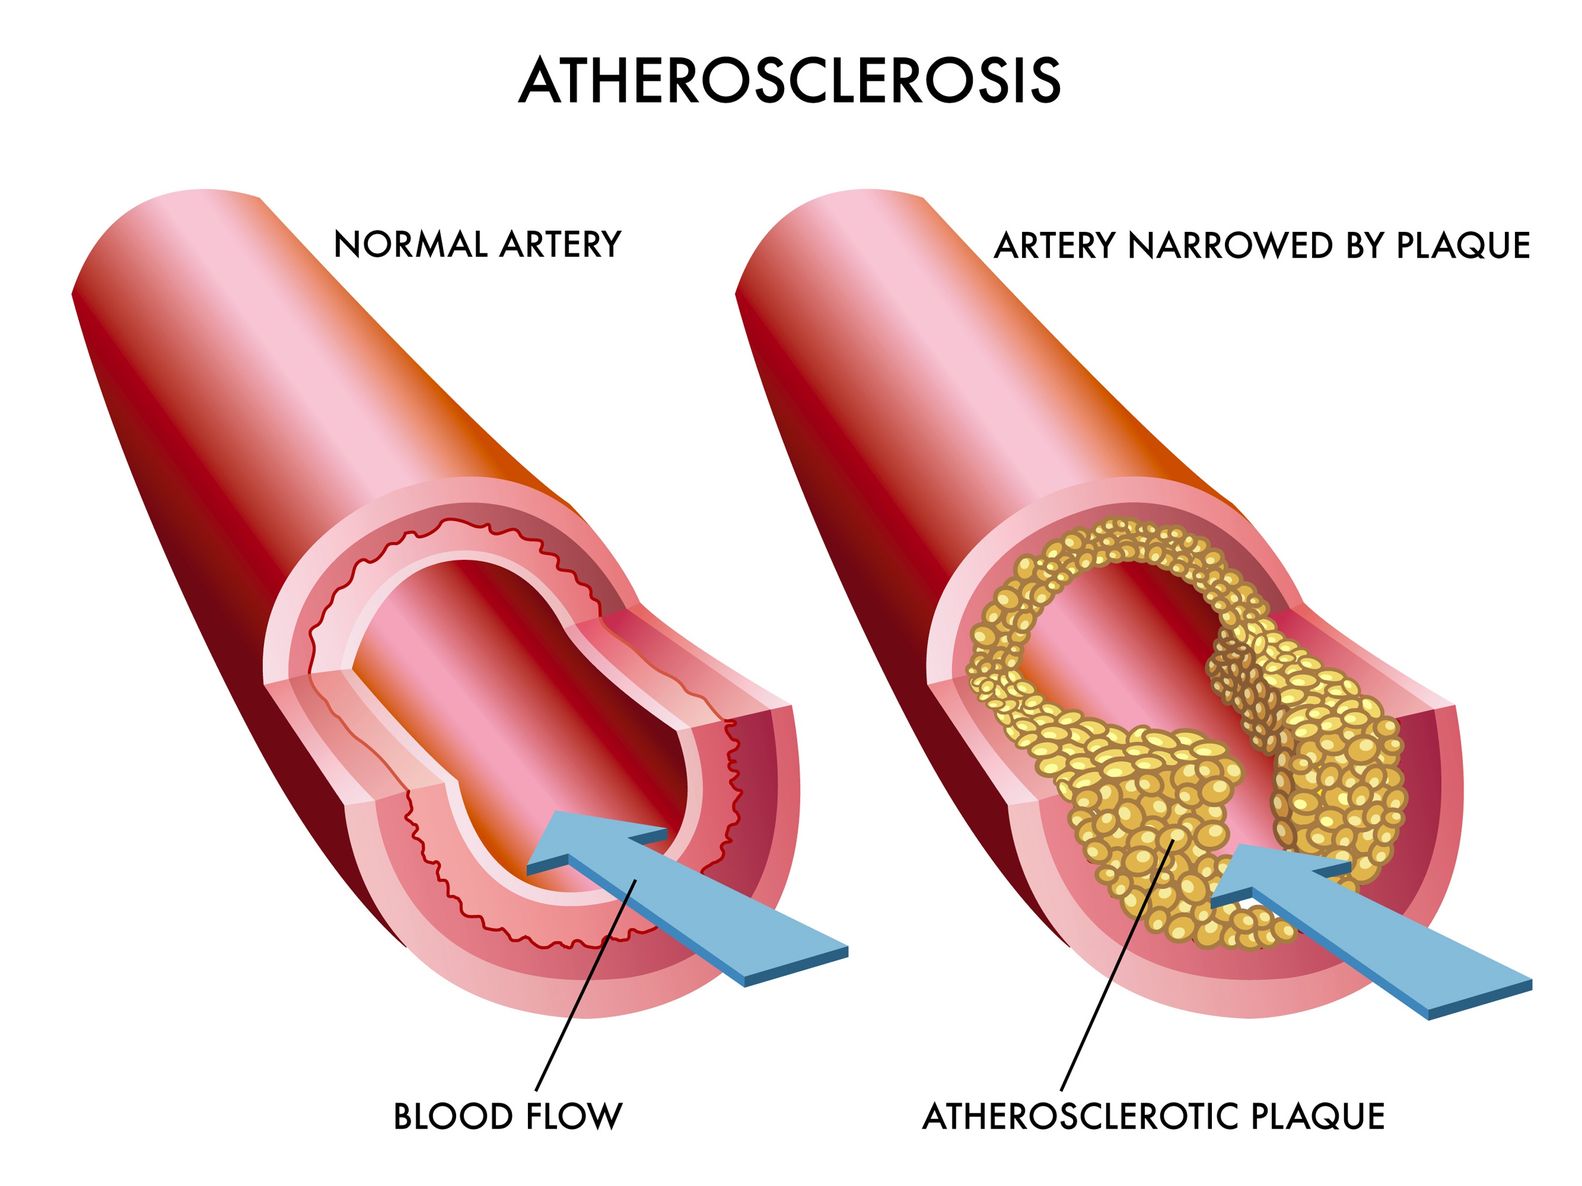 Normal artery. https://www.info-on-high-blood-pressure.com/consequences-of-high-blood-pressure.html